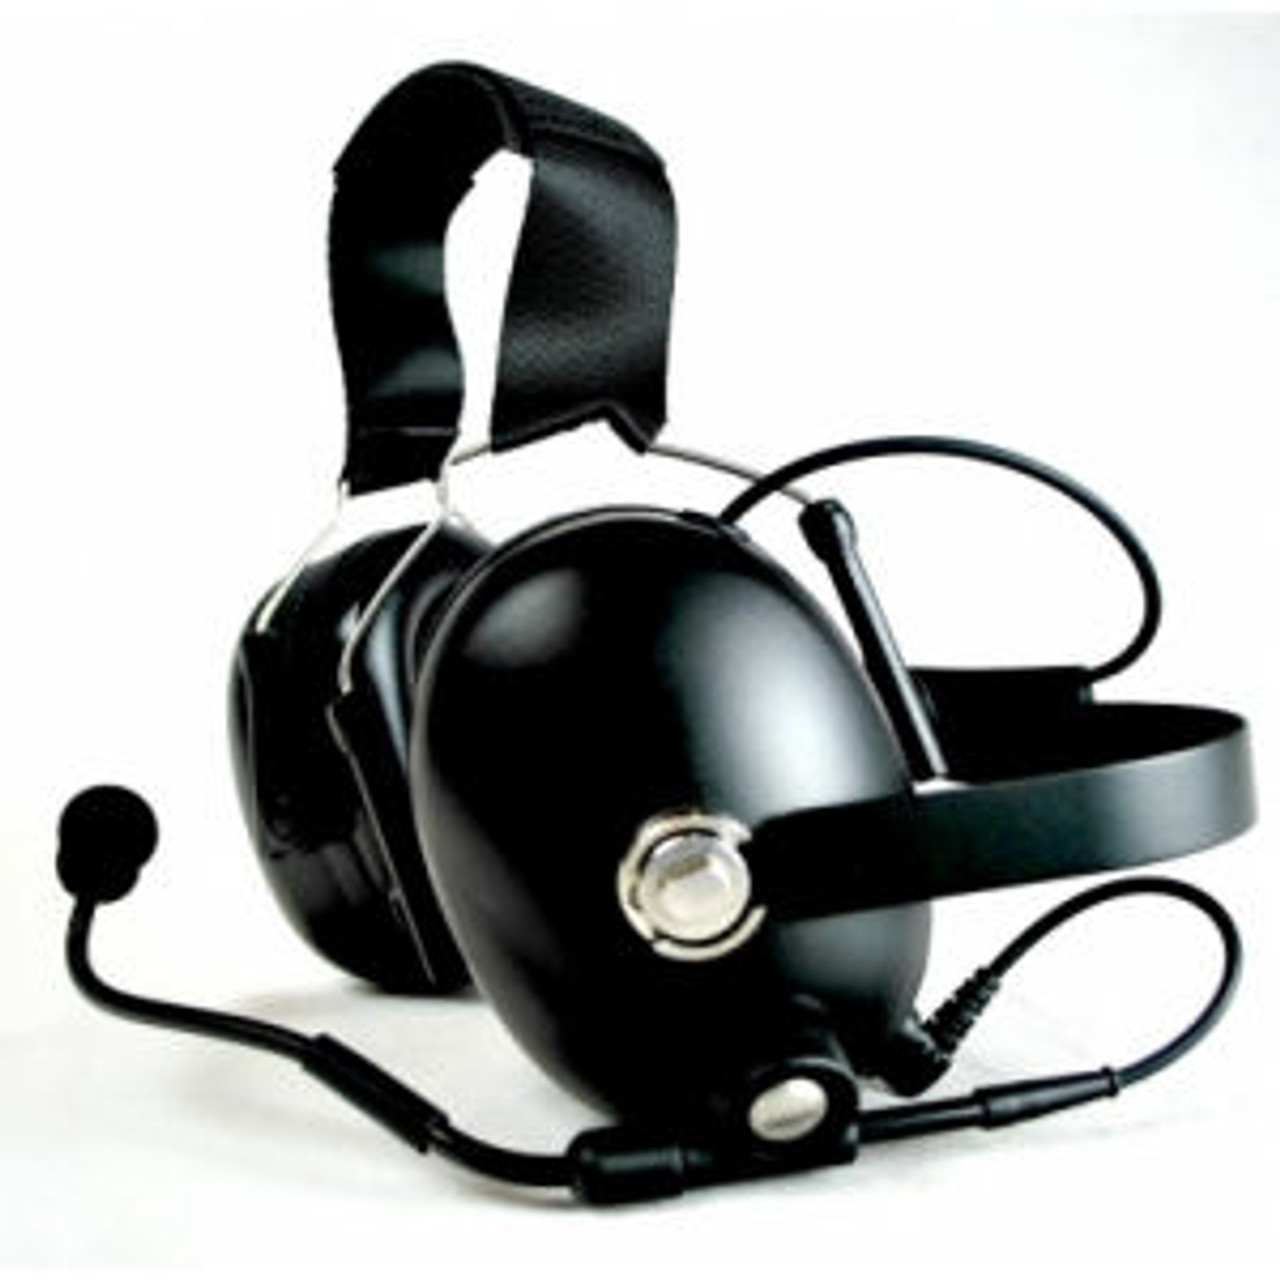 M/A-Com P7350 Noise Canceling Double Muff Behind The Head Headset